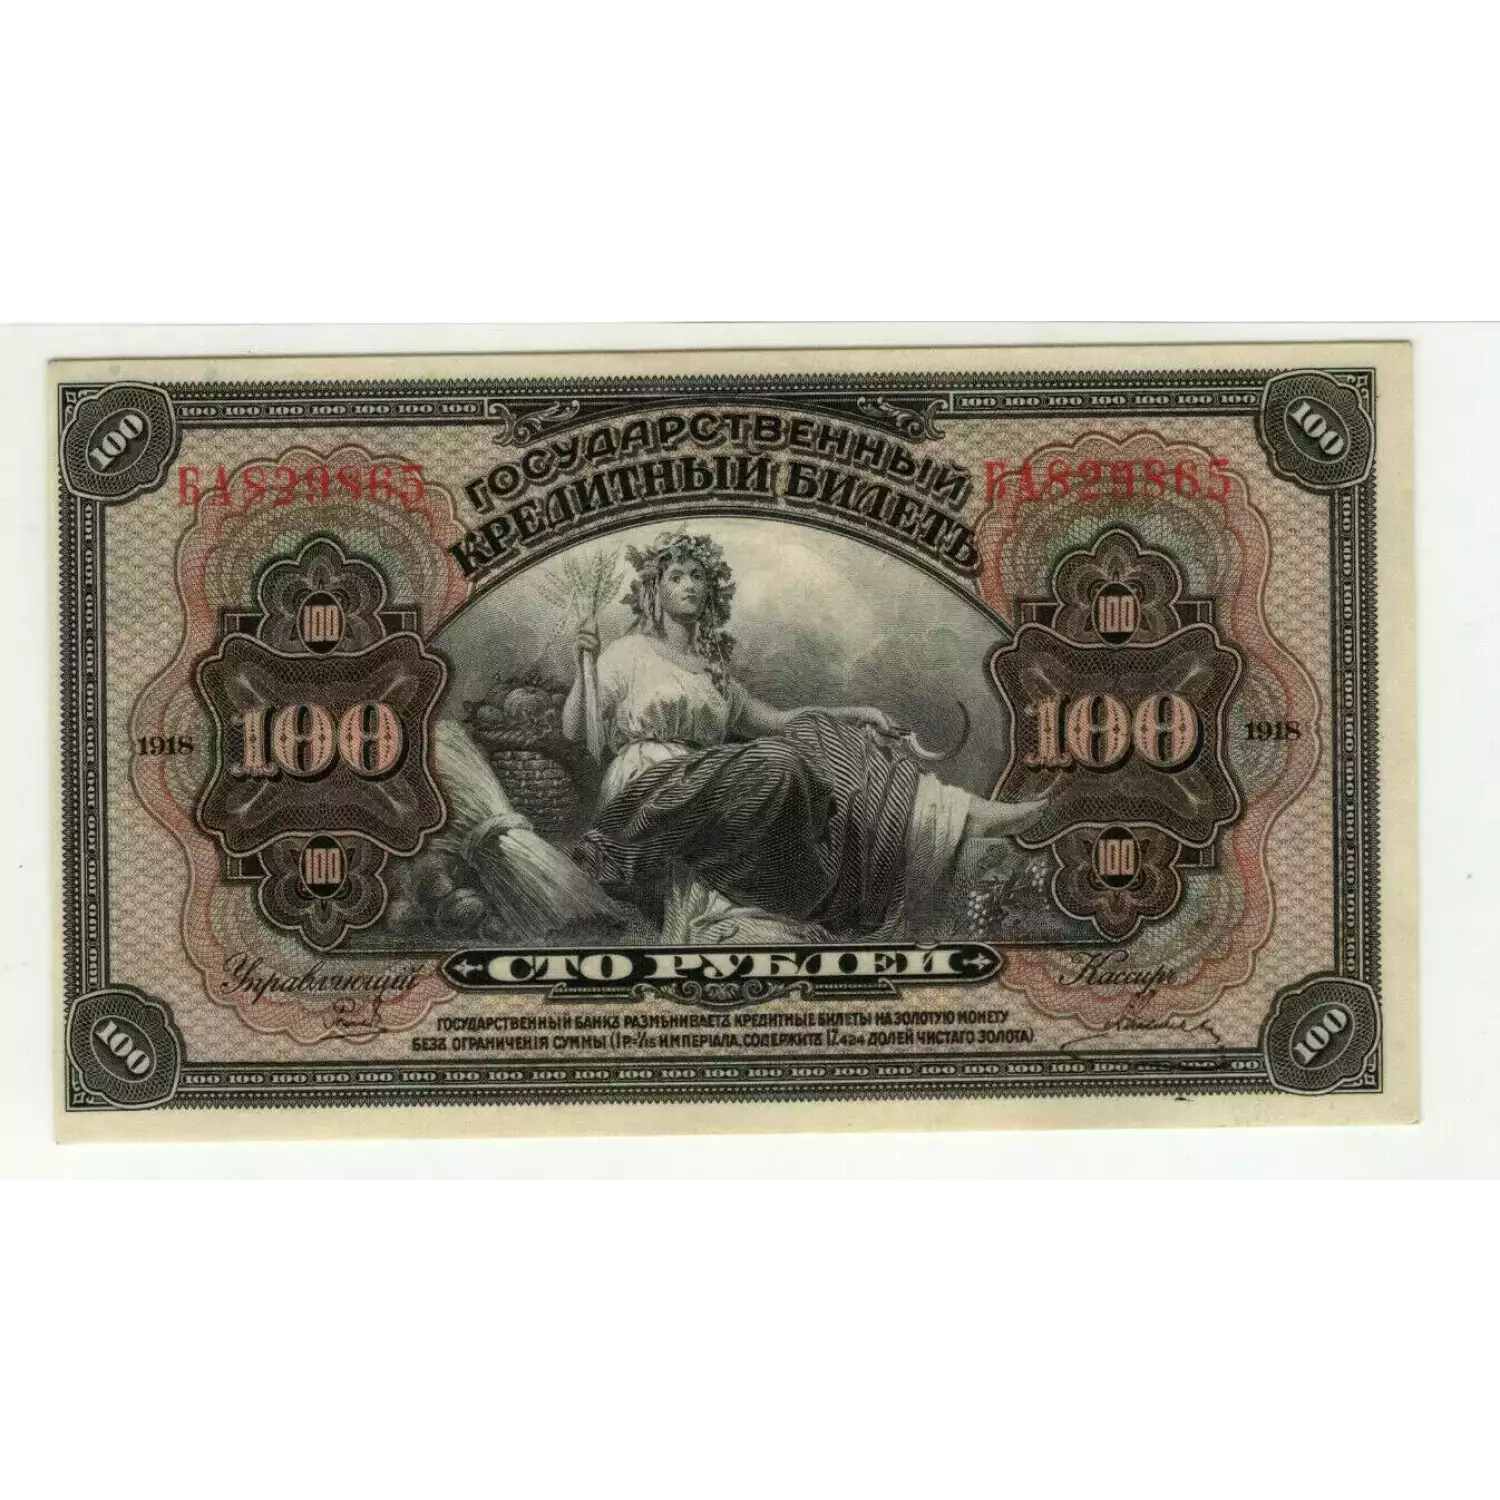 100 Rubles 1918 (1920), 1920 ?????????????I? ????????I? ?????? GOVERNMENT CREDIT NOTES ISSUE  Russia - East Siberia S1249 (3)